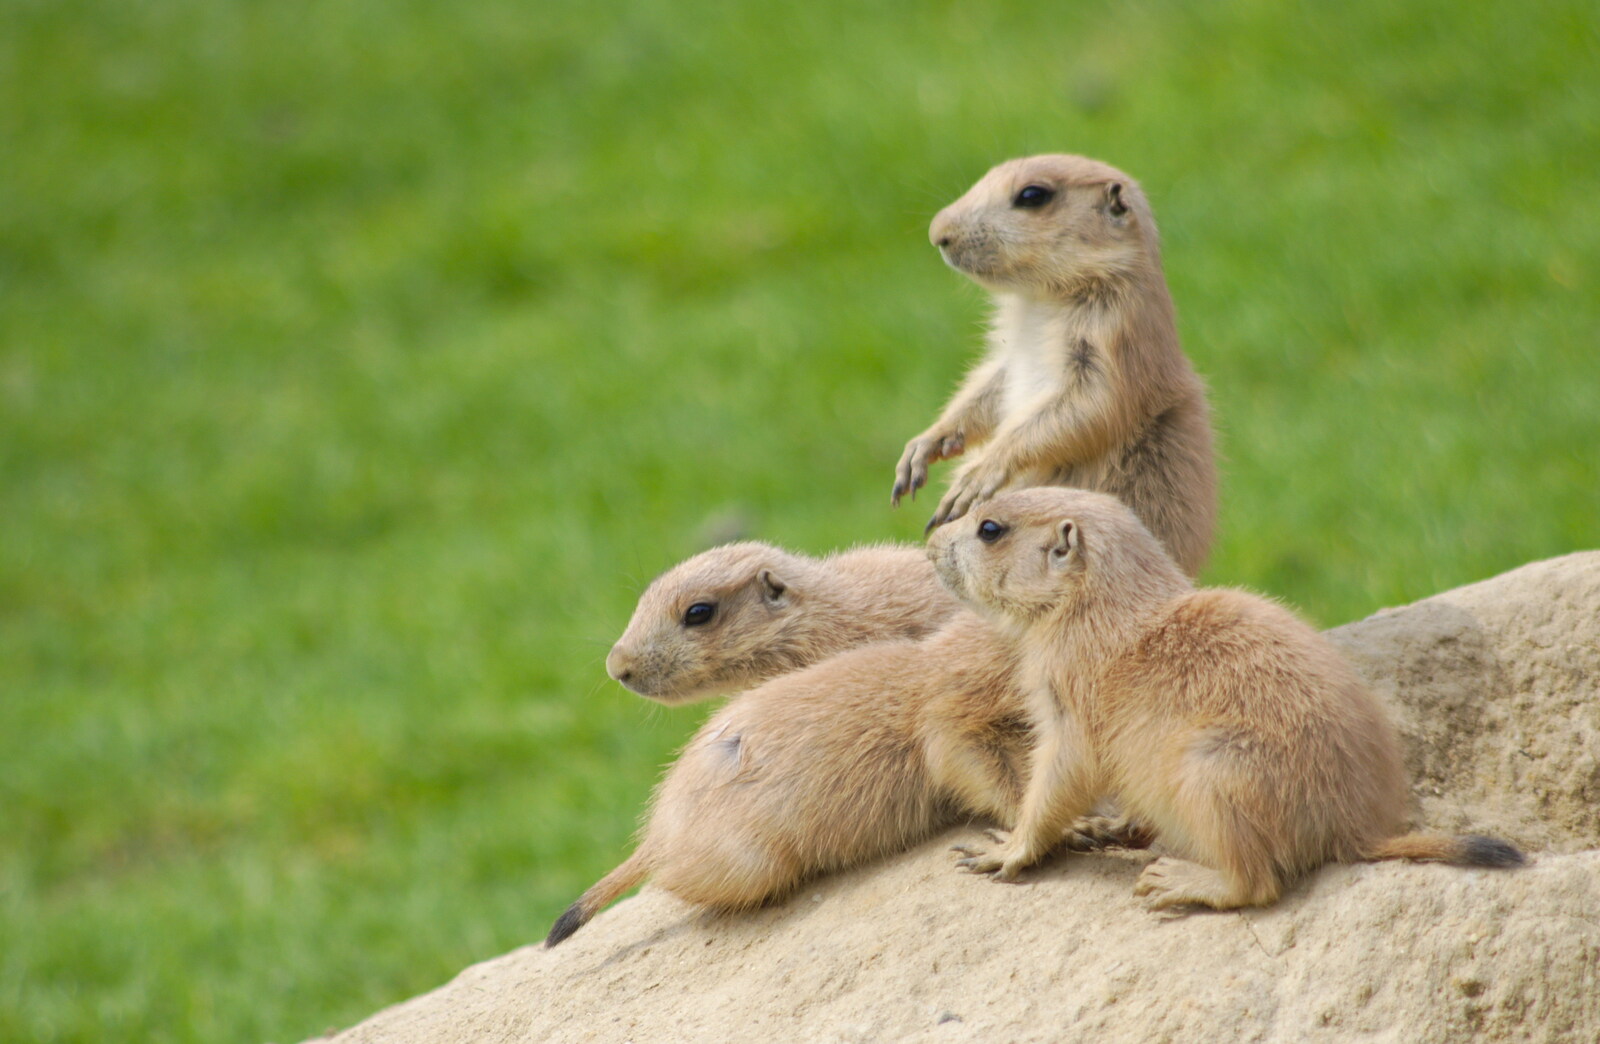 A Birthday Trip to the Zoo, Banham, Norfolk - 26th May 2014: Prairie dogs sit up